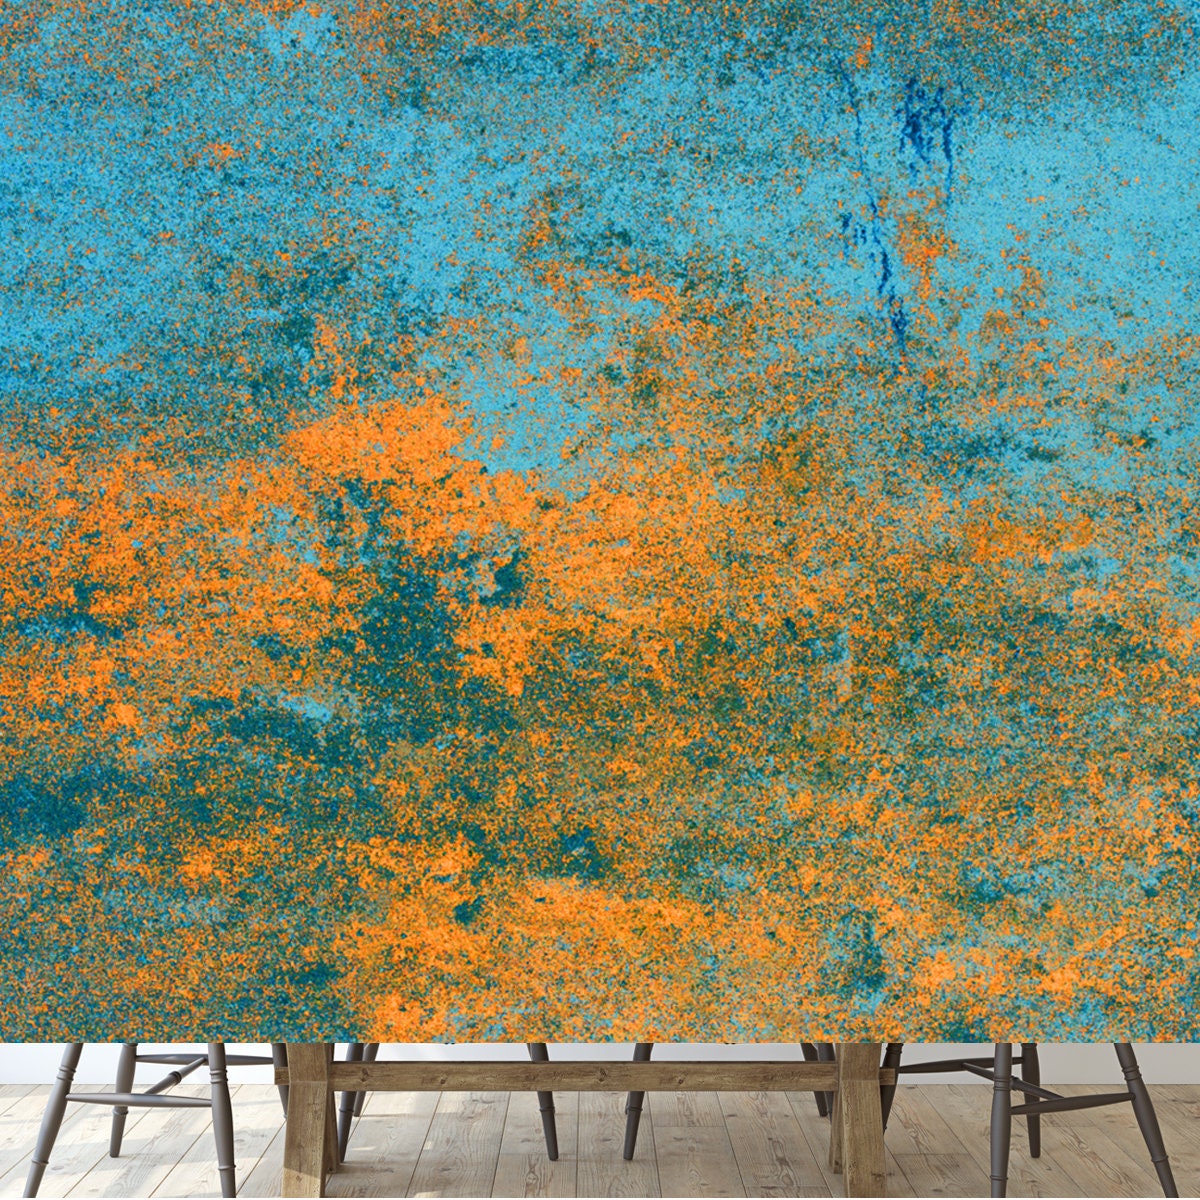 Blue, Orange Rustic Abstract Concrete Stone Texture Background Wallpaper Dining Room Mural